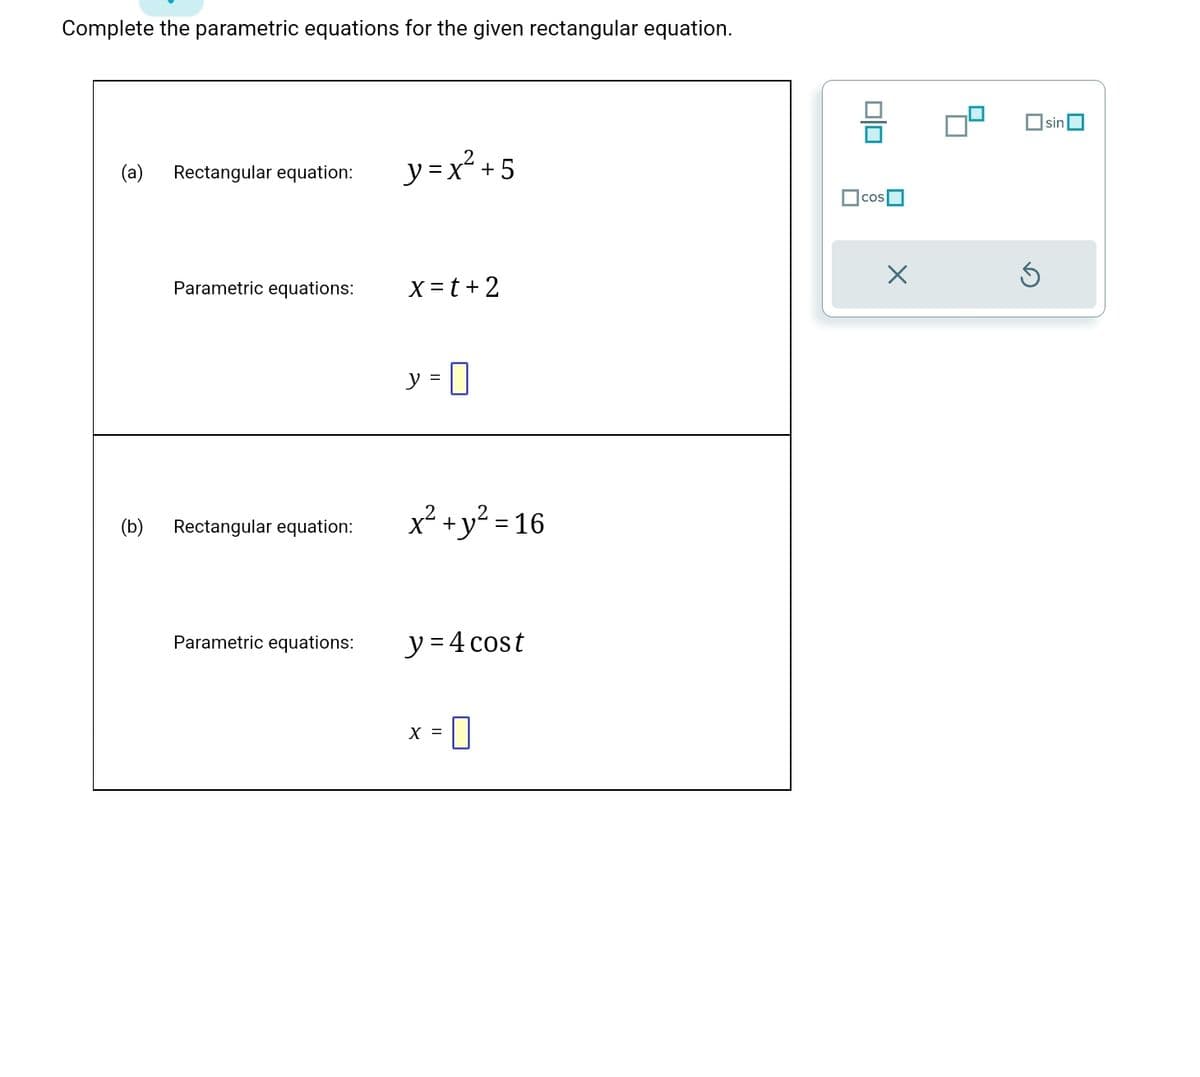 Complete the parametric equations for the given rectangular equation.
(a) Rectangular equation:
(b)
Parametric equations:
Rectangular equation:
Parametric equations:
y=x² +5
x=t+2
y = 0
x² + y² = 16
y = 4 cost
X =
0
010
cos
X
sin